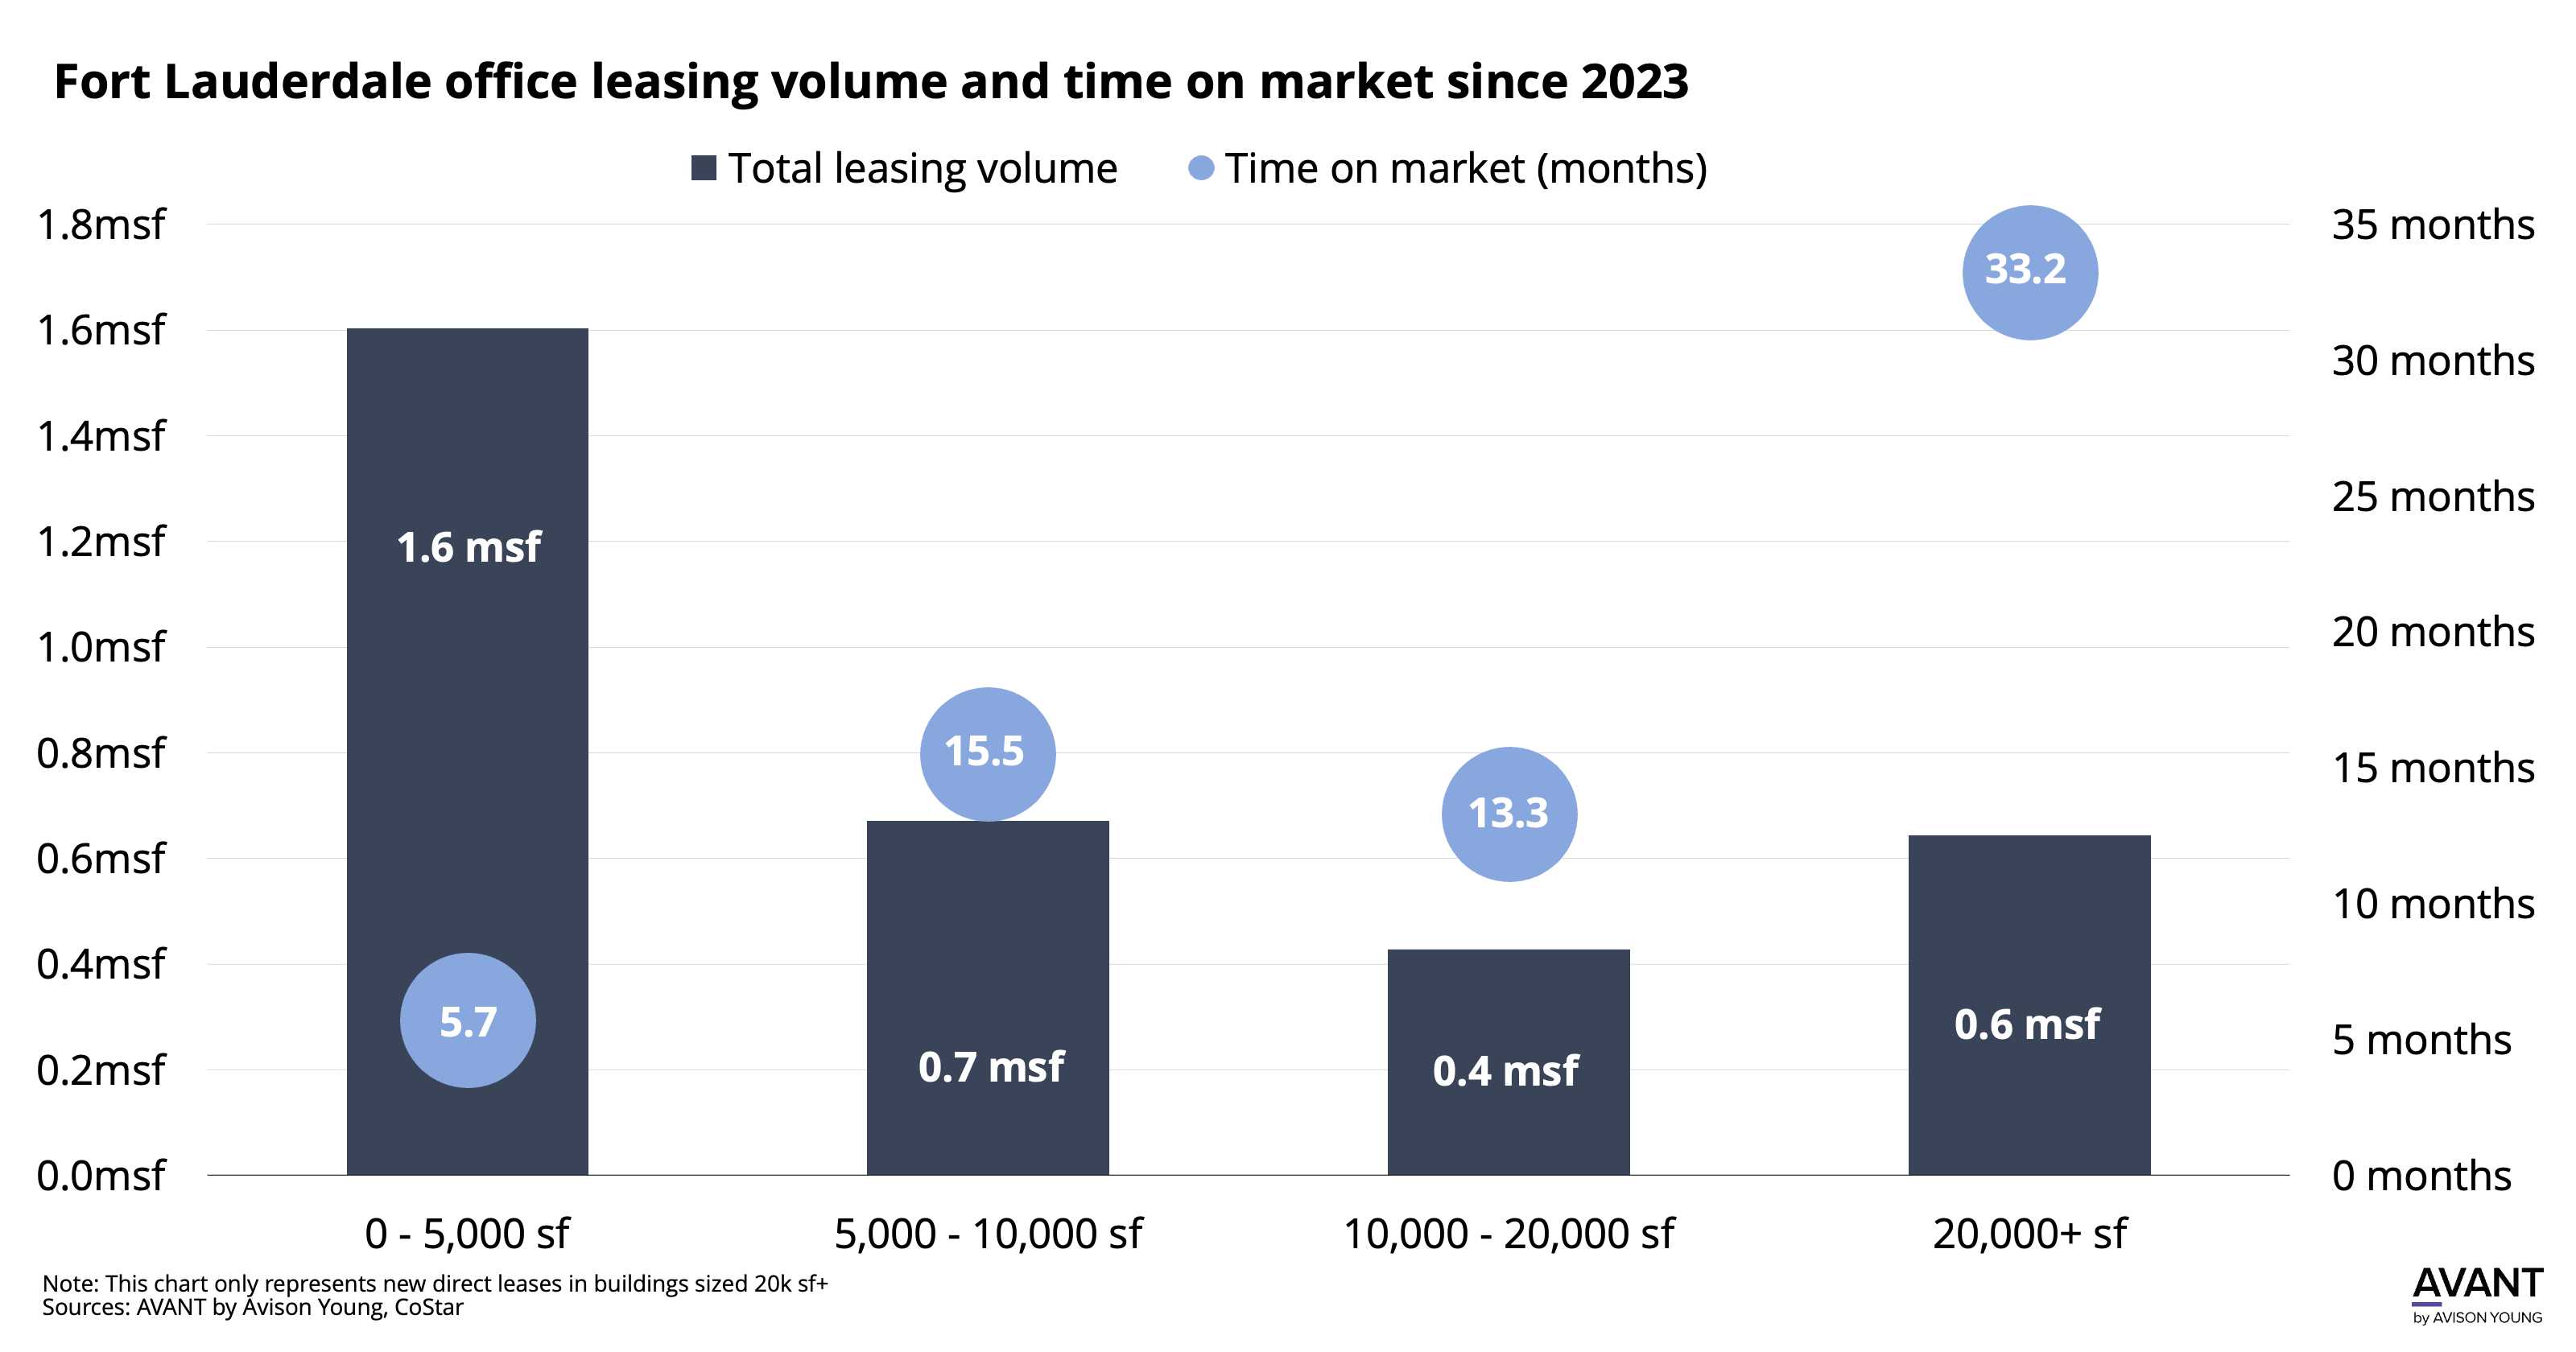 graph of Fort Lauderdale office leasing volume and time on market since 2023 by office building size